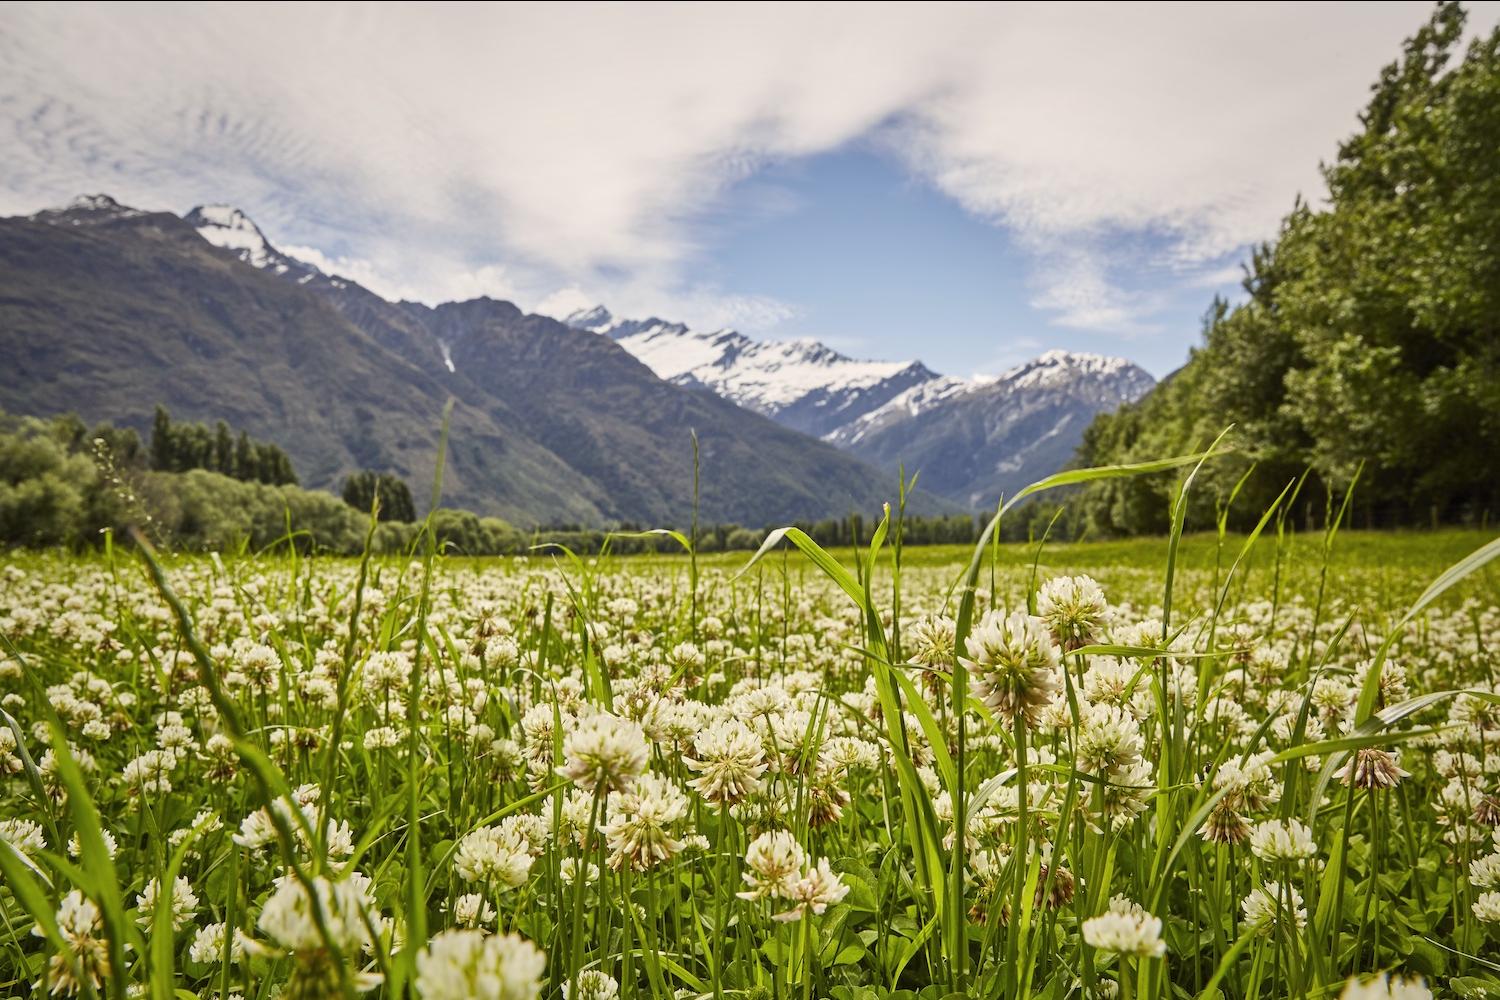 field with flowers and mountains in the background - new zealand